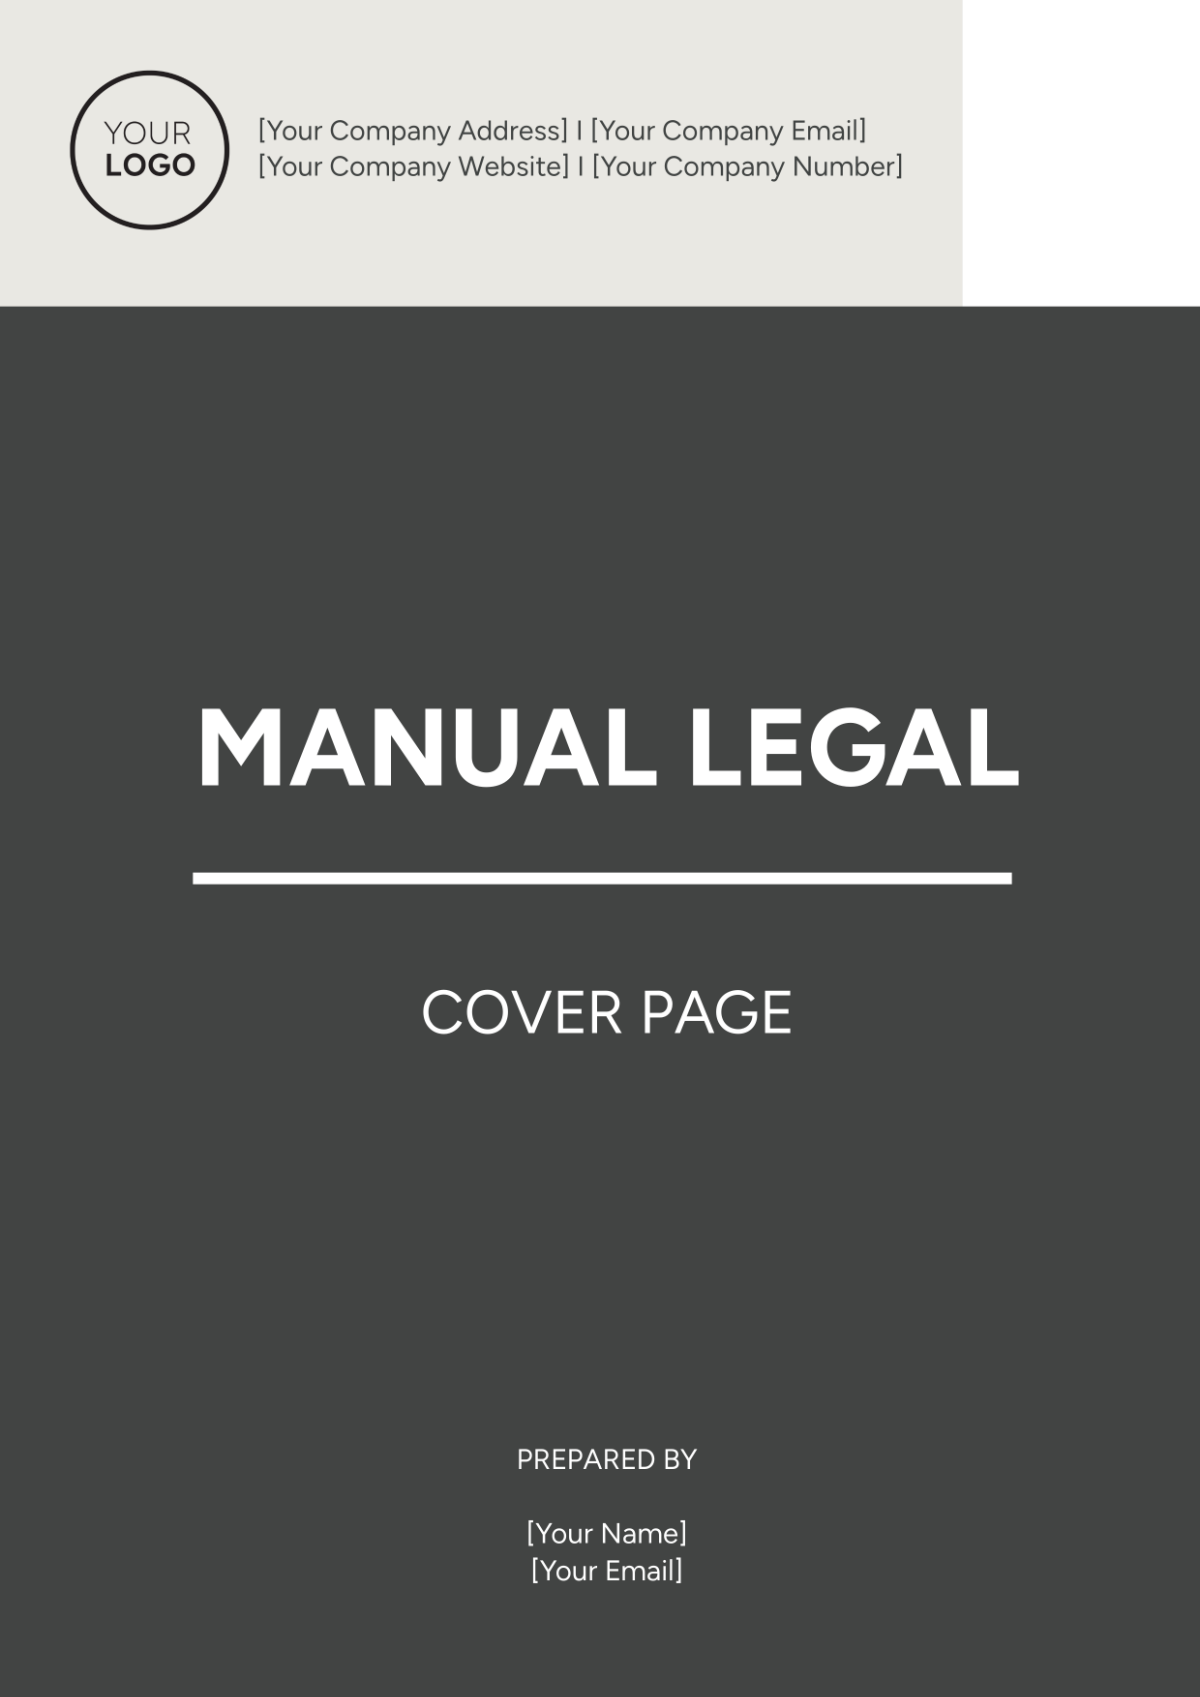 Manual Legal Cover Page